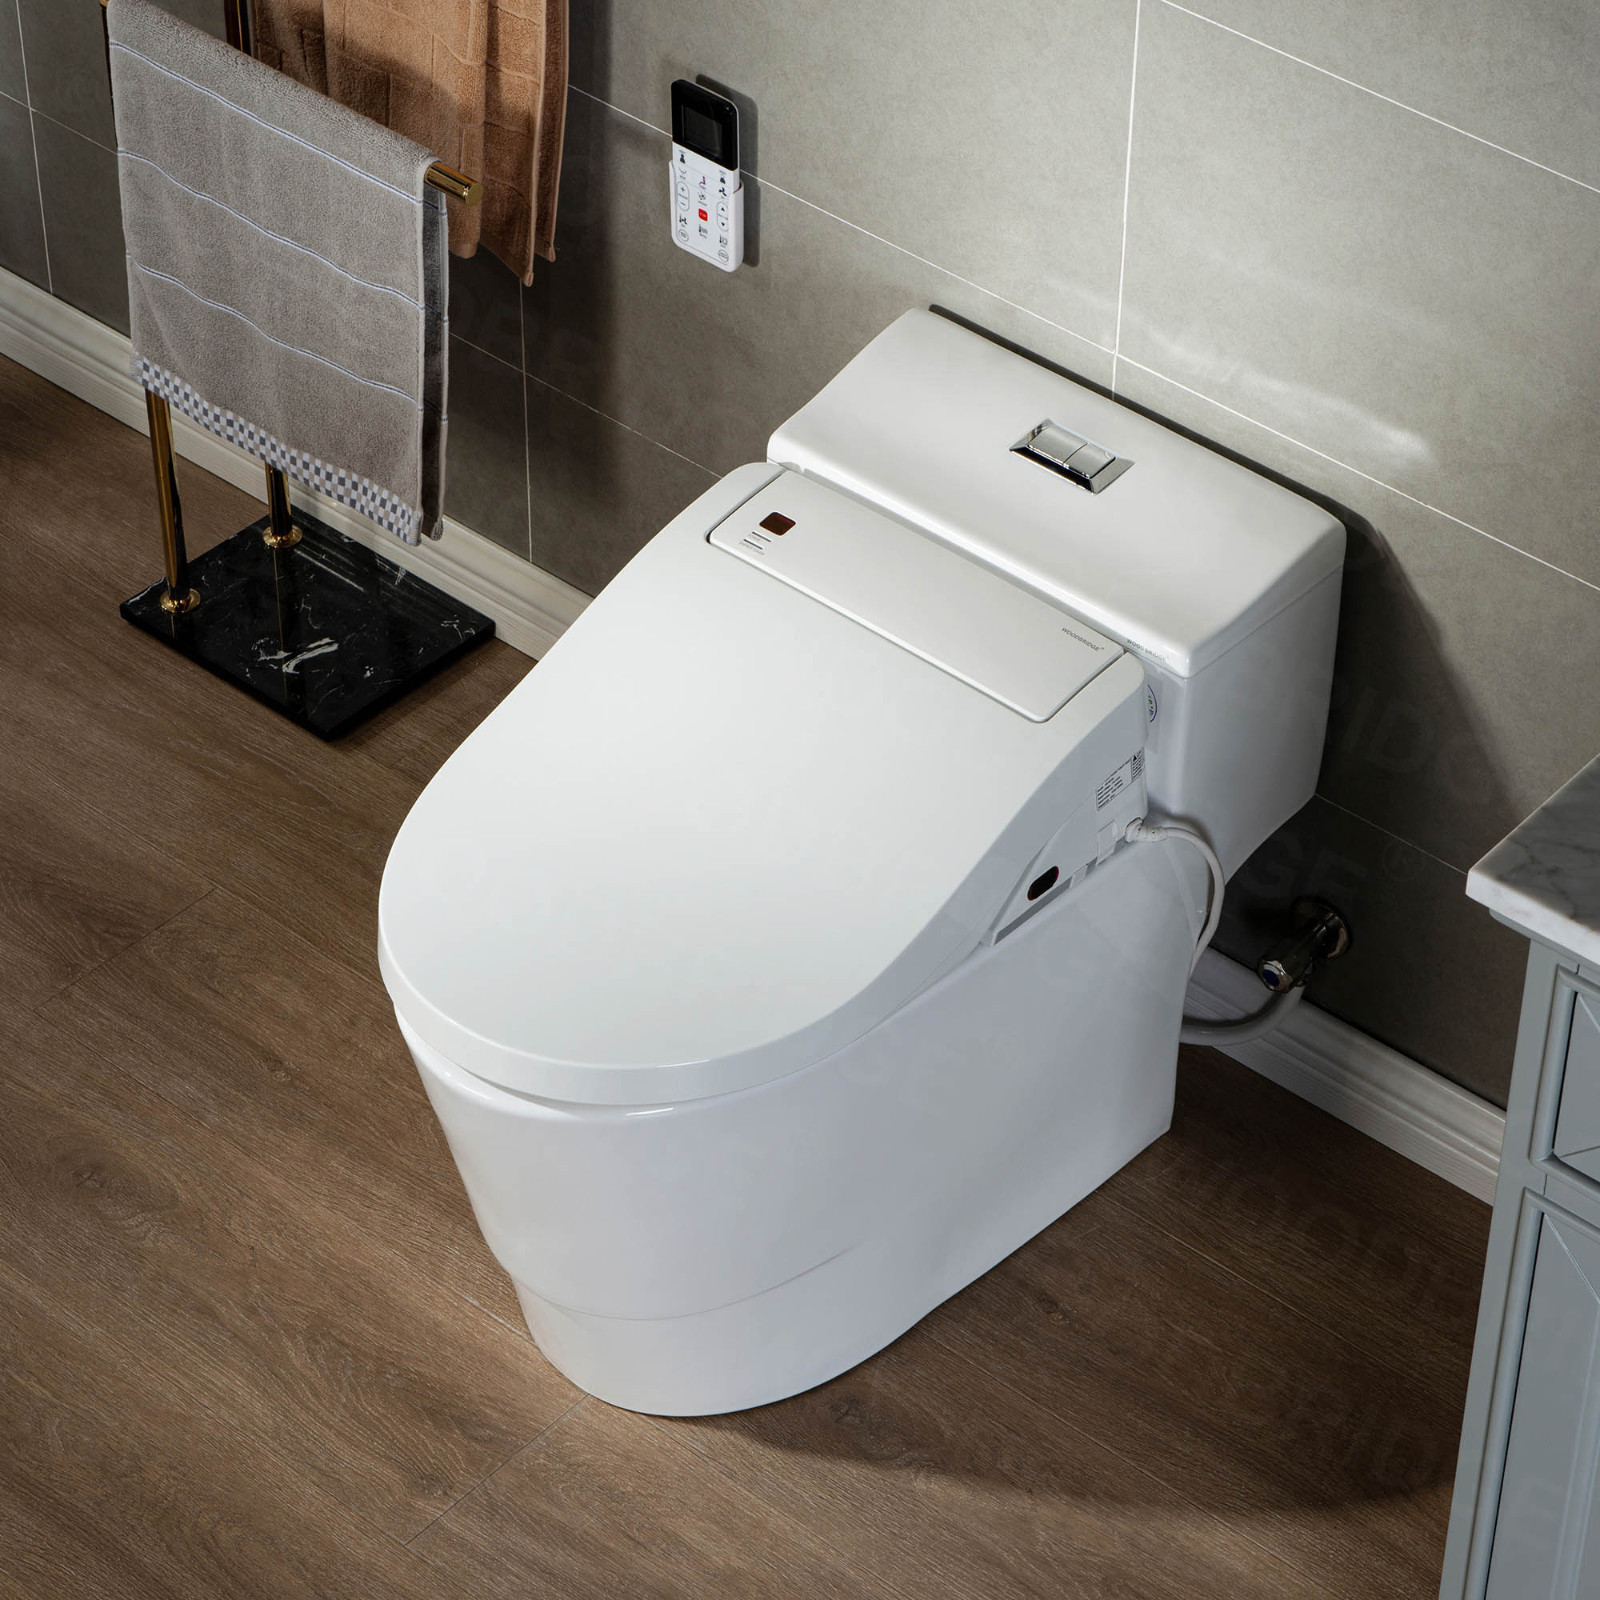  WOODBRIDGE Toilet & Bidet Luxury Elongated One Piece Advanced Smart Seat with Temperature Controlled Wash Functions and Air Dryer, Toilet with Bidet. T-0737, Bidet & Toilet_9723